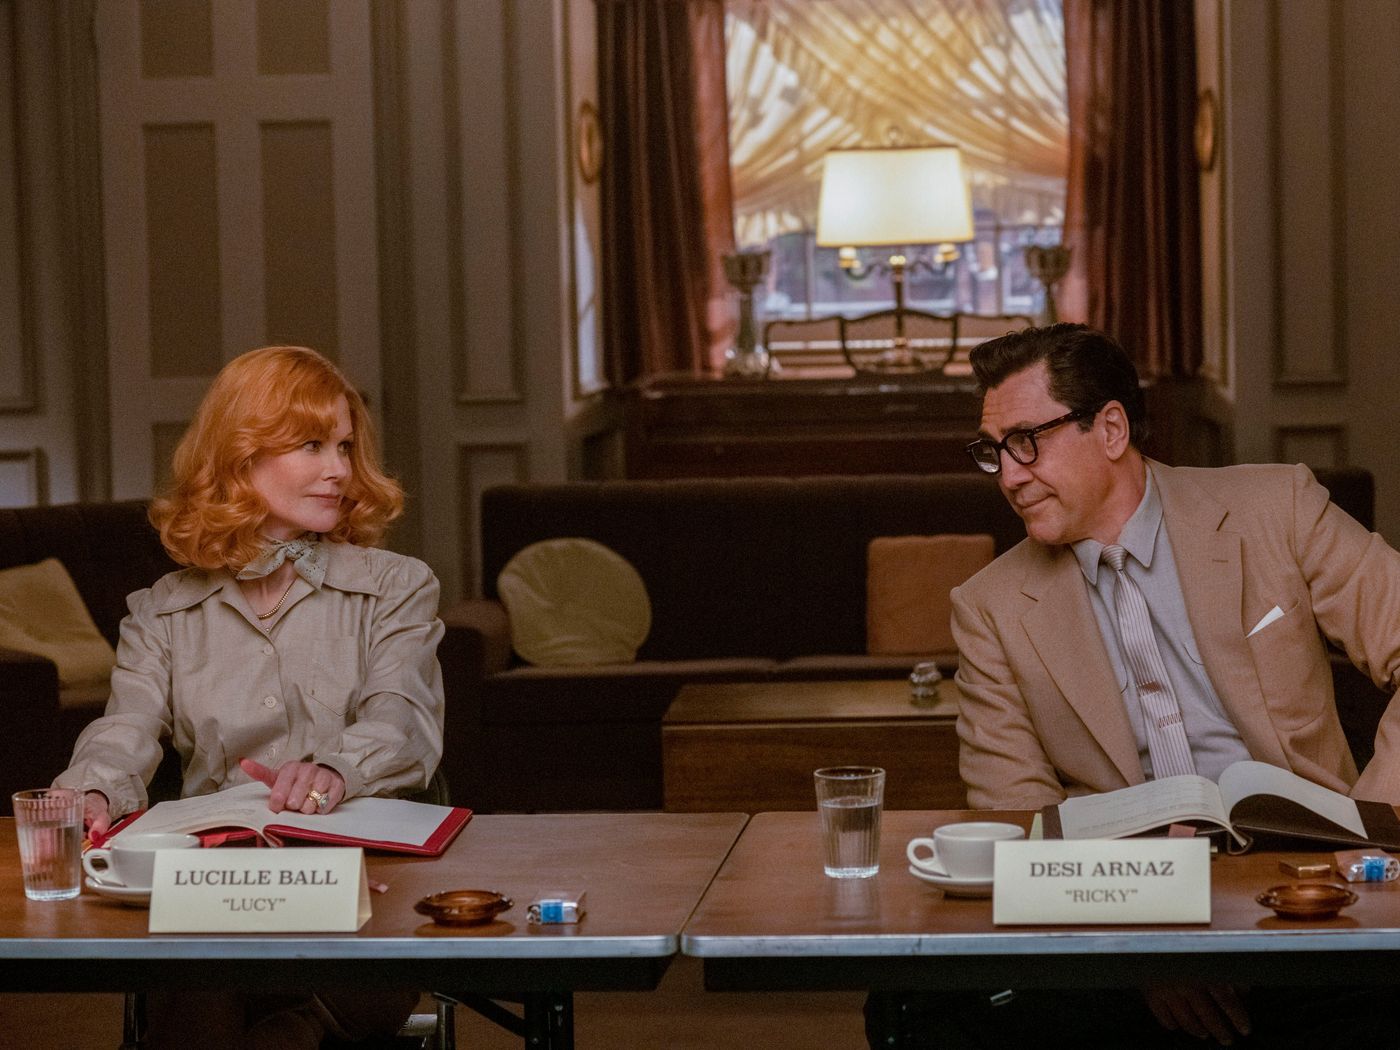 Nicole Kidman as Lucille Ball and Javier Bardem as Desi Arnaz sitting at a table